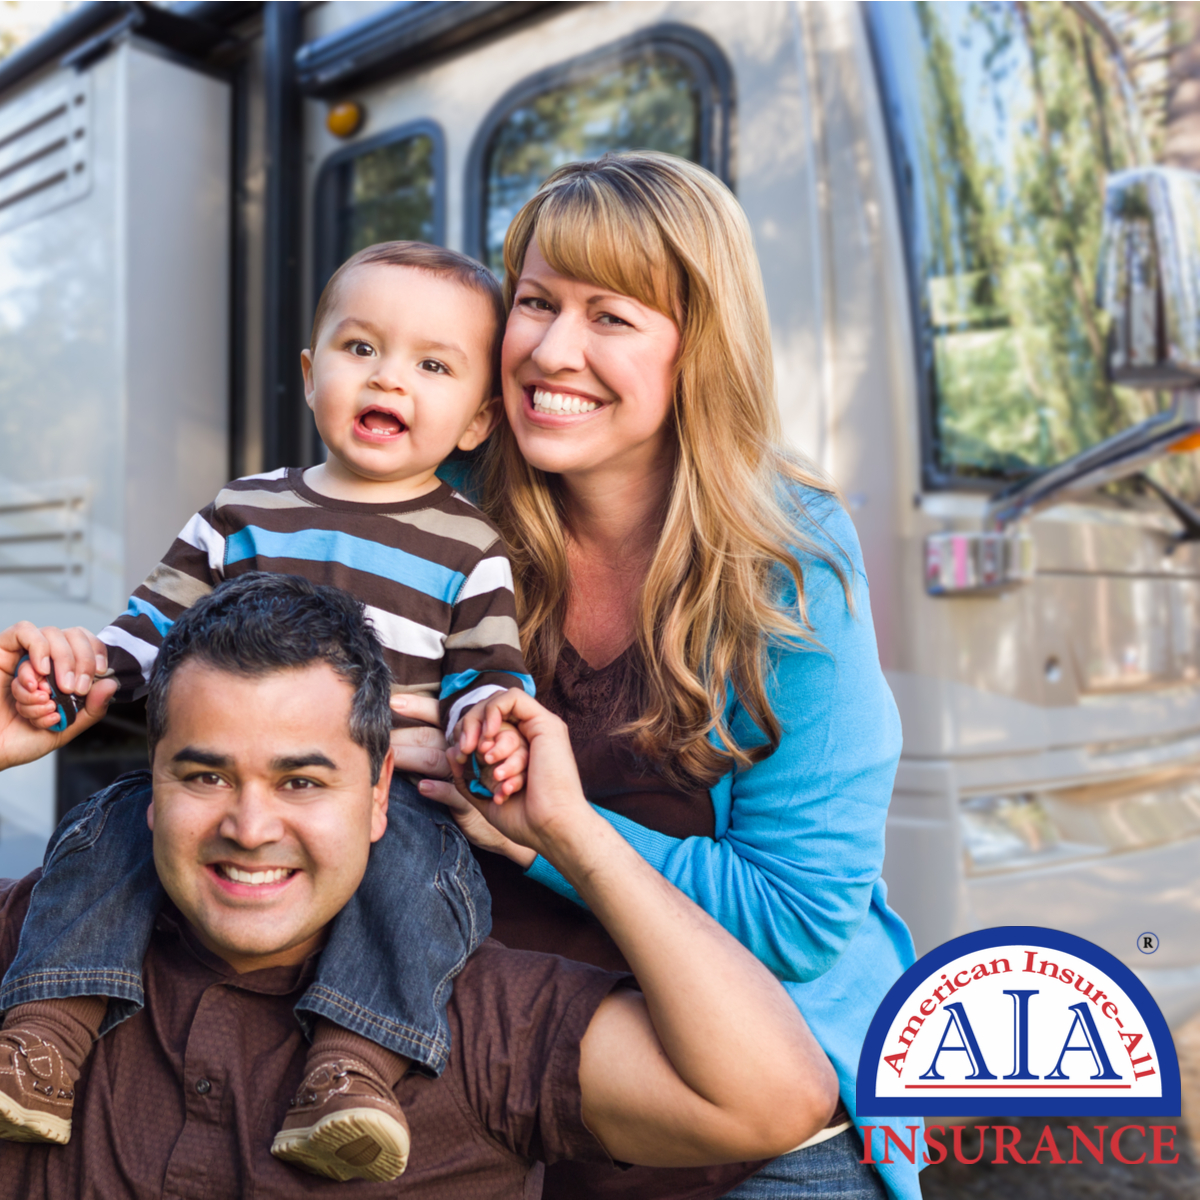 https://www.americaninsureall.com/blog/2022/04/07/drive-safer-this-summer-with-dependable-rv-insurance-from-american-insure-all.aspx